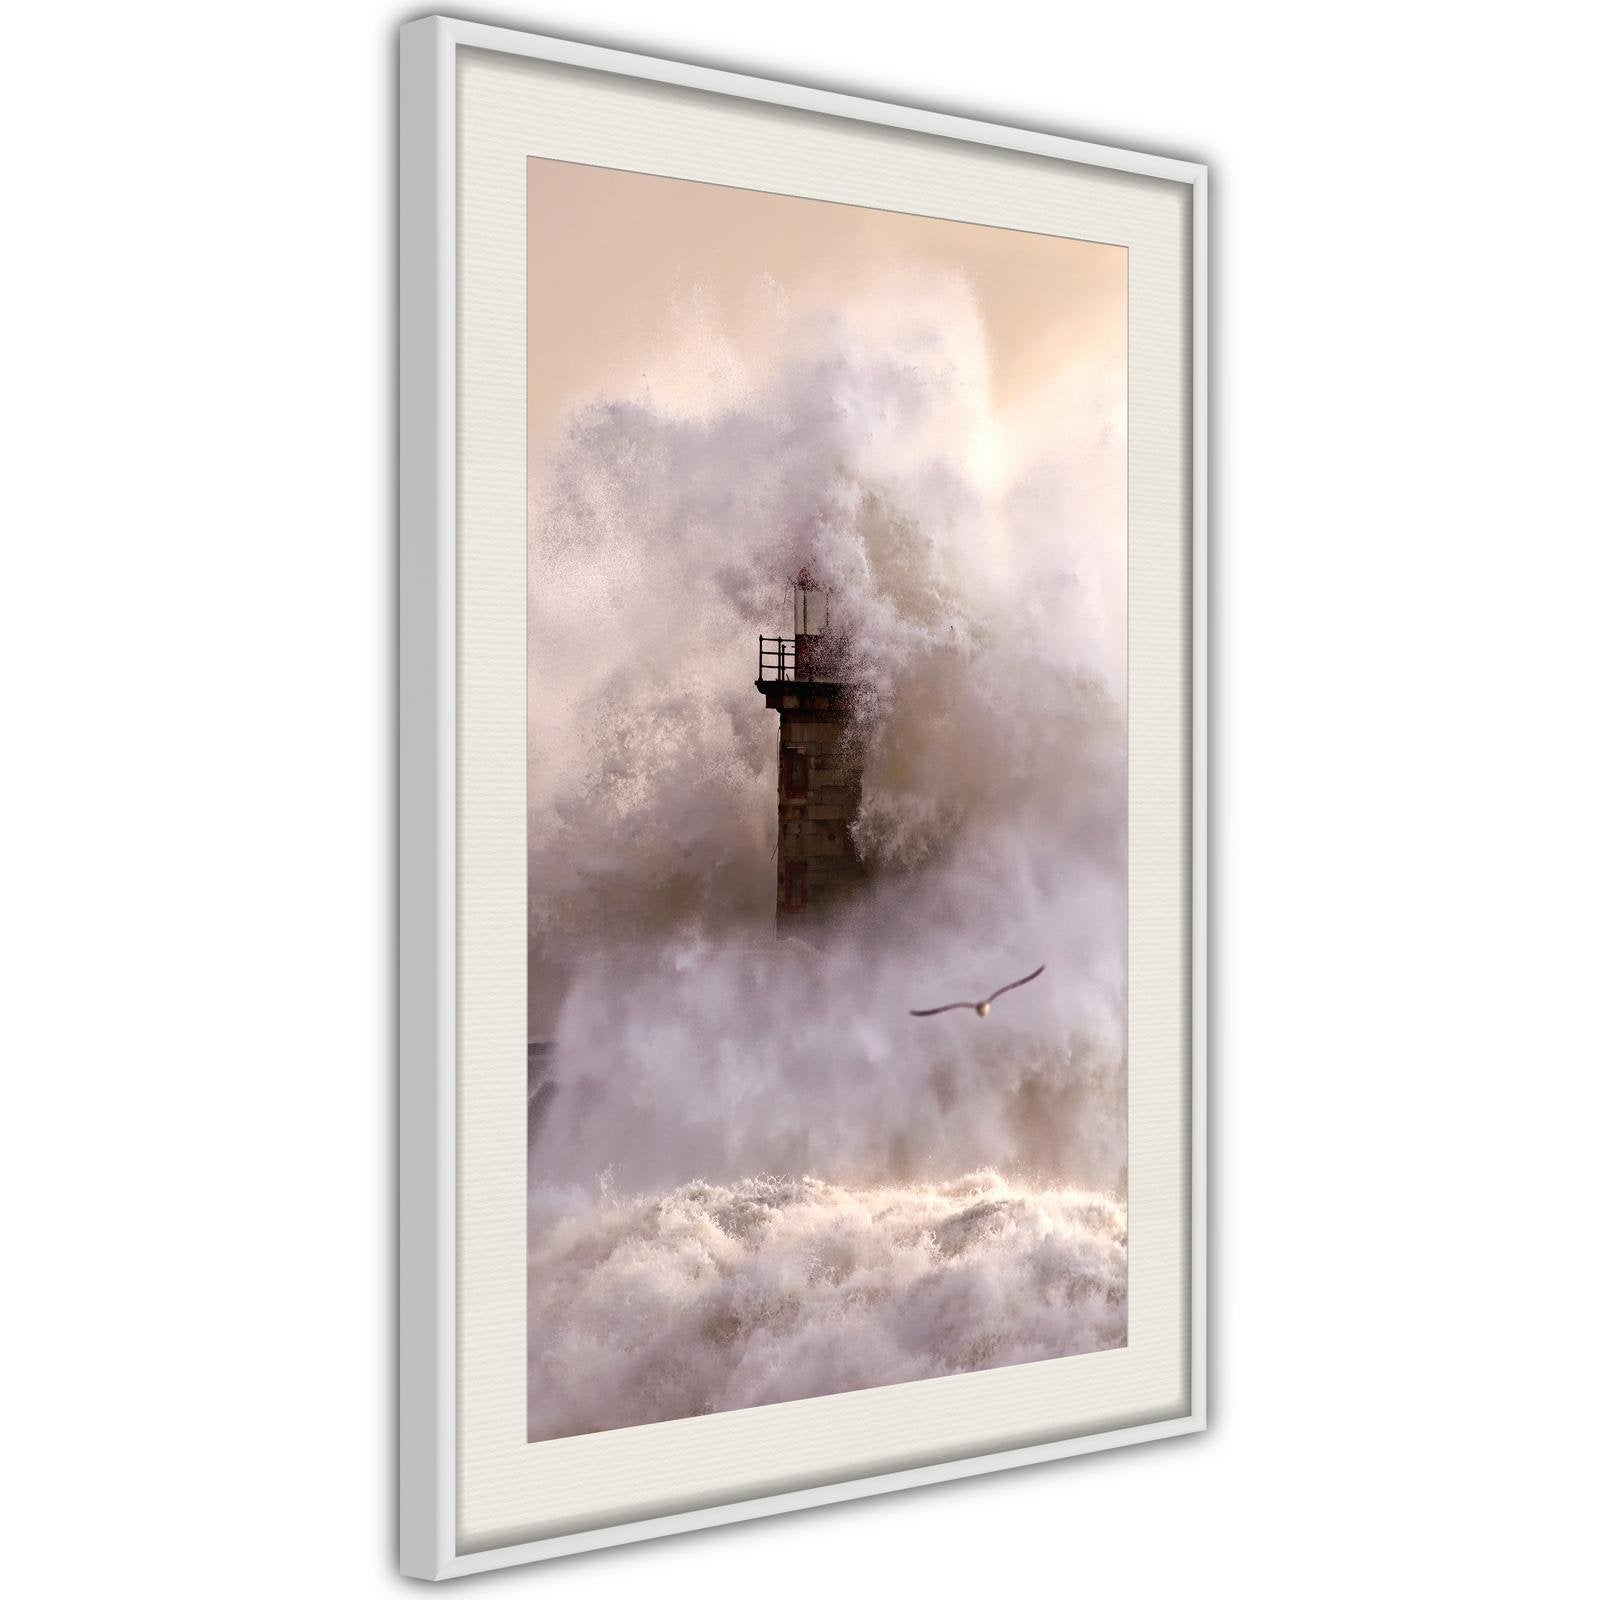 Inramad Poster / Tavla - Lighthouse During a Storm-Poster Inramad-Artgeist-peaceofhome.se